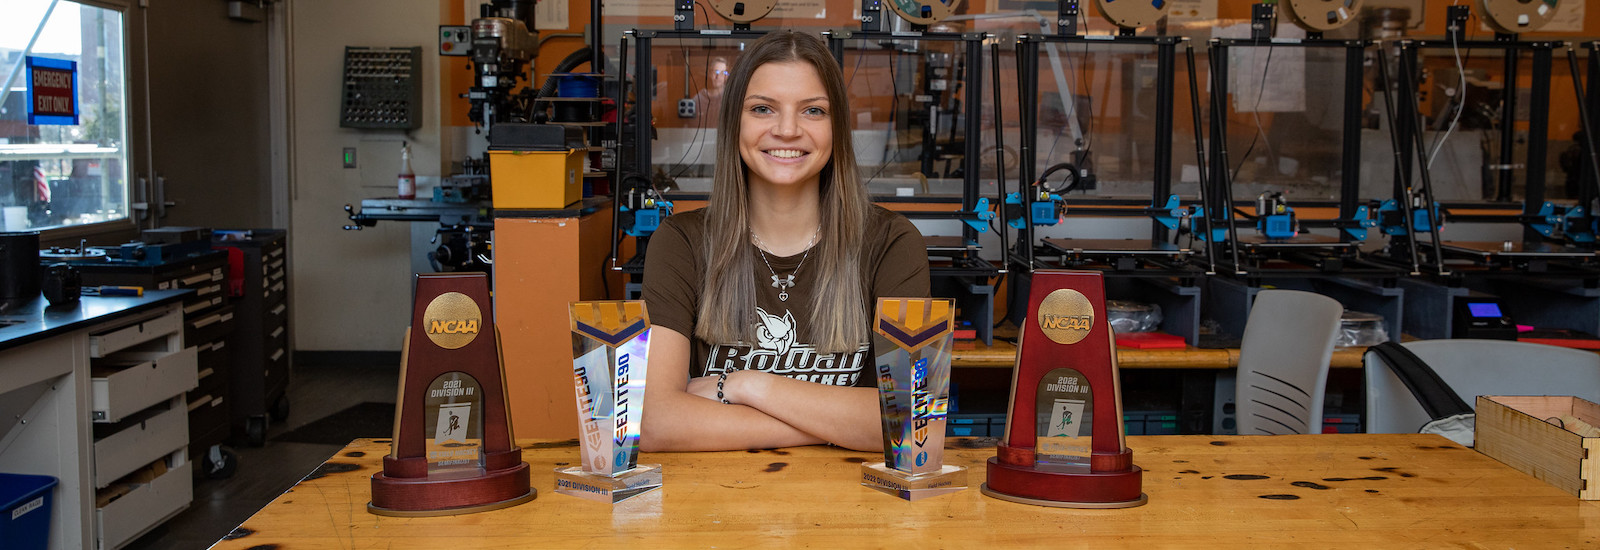 Rowan mechanical engineering student Abby smiles in front of her engineering equipment in the lab.